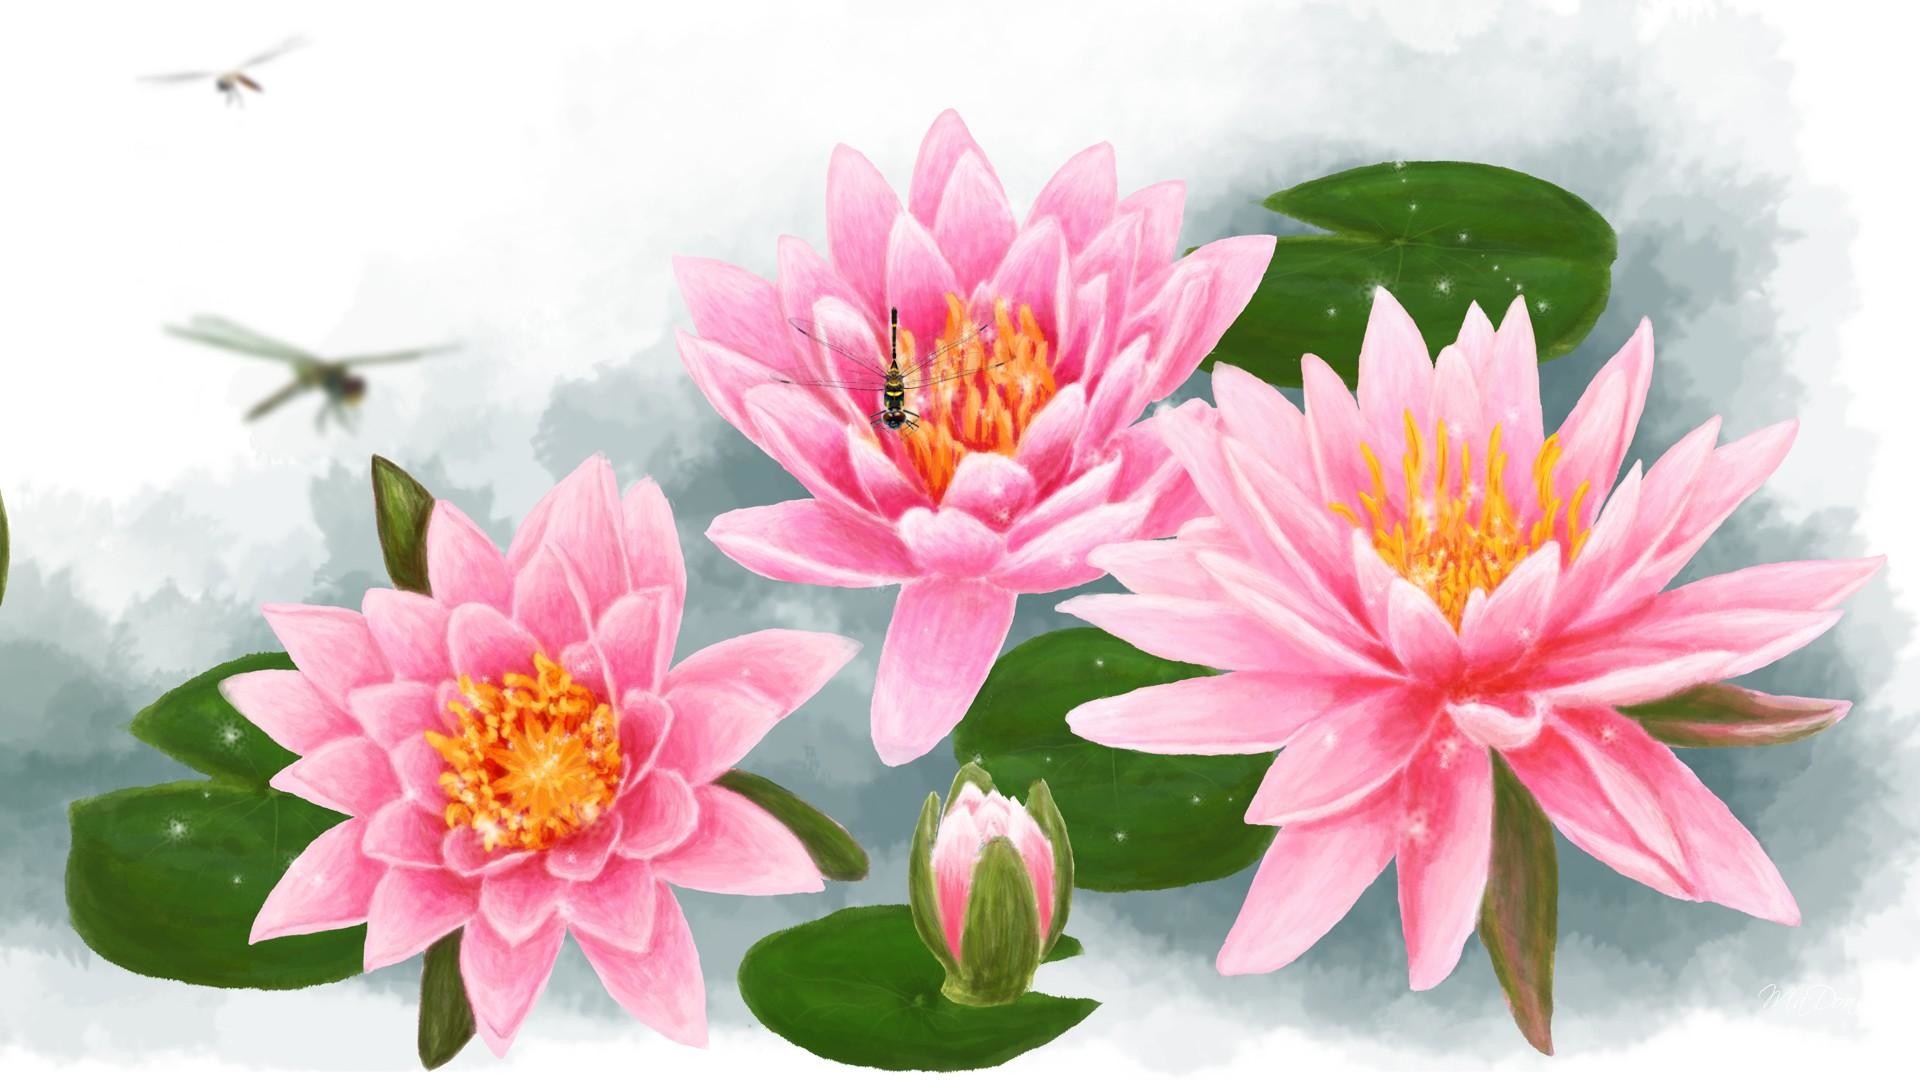 1920x1080 Water Lily Wallpapers Wallpaper | Wallpapers 4k | Pinterest | Water lilies  and Wallpaper